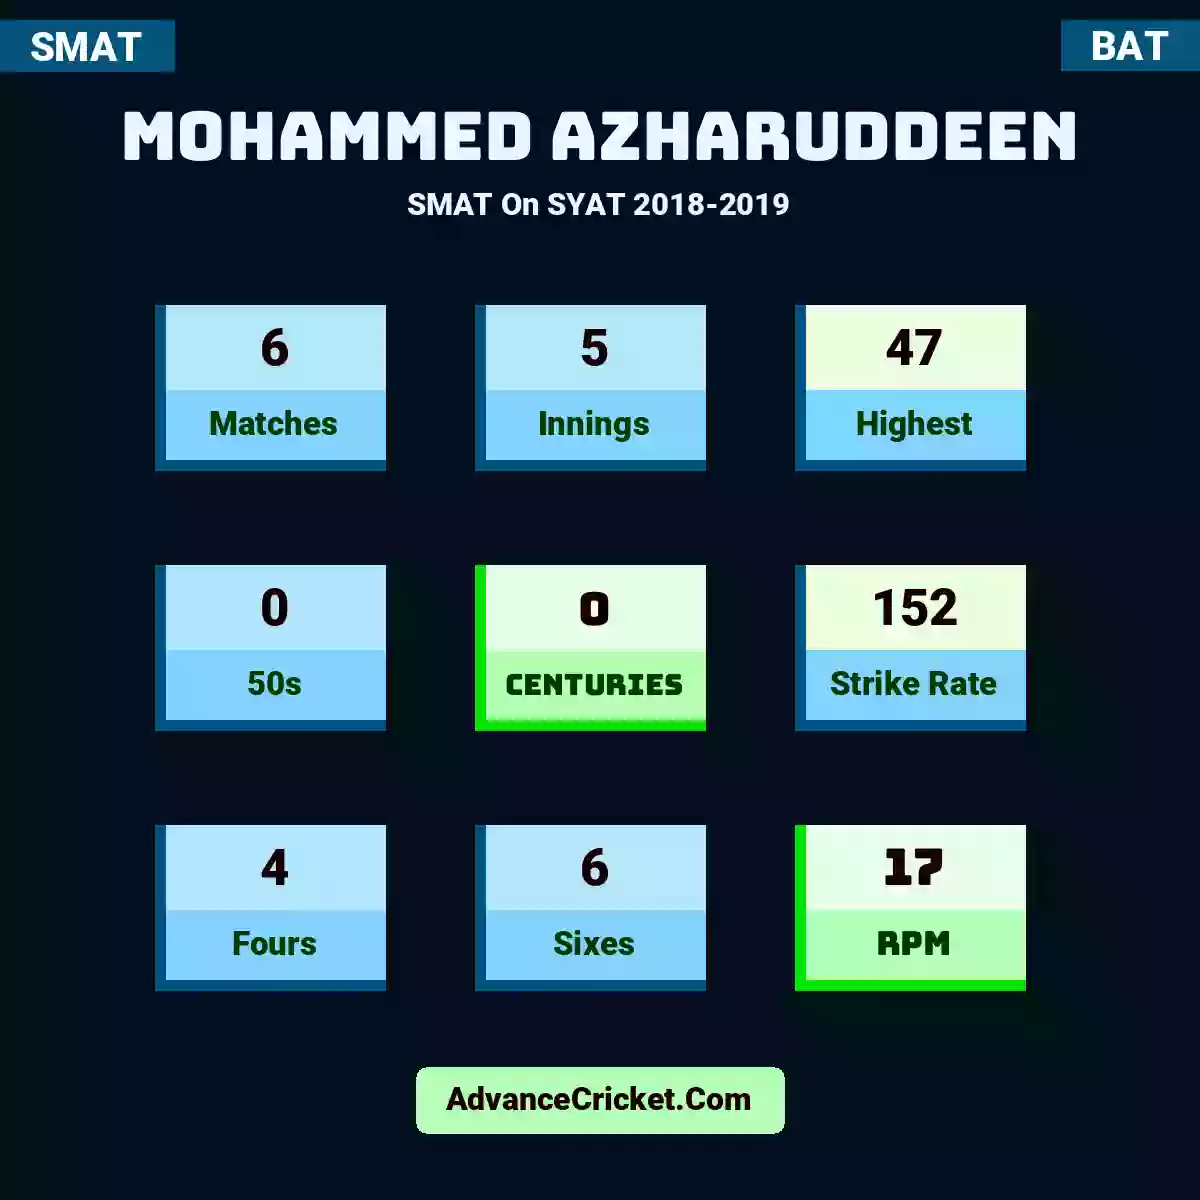 Mohammed Azharuddeen SMAT  On SYAT 2018-2019, Mohammed Azharuddeen played 6 matches, scored 47 runs as highest, 0 half-centuries, and 0 centuries, with a strike rate of 152. M.Azharuddeen hit 4 fours and 6 sixes, with an RPM of 17.